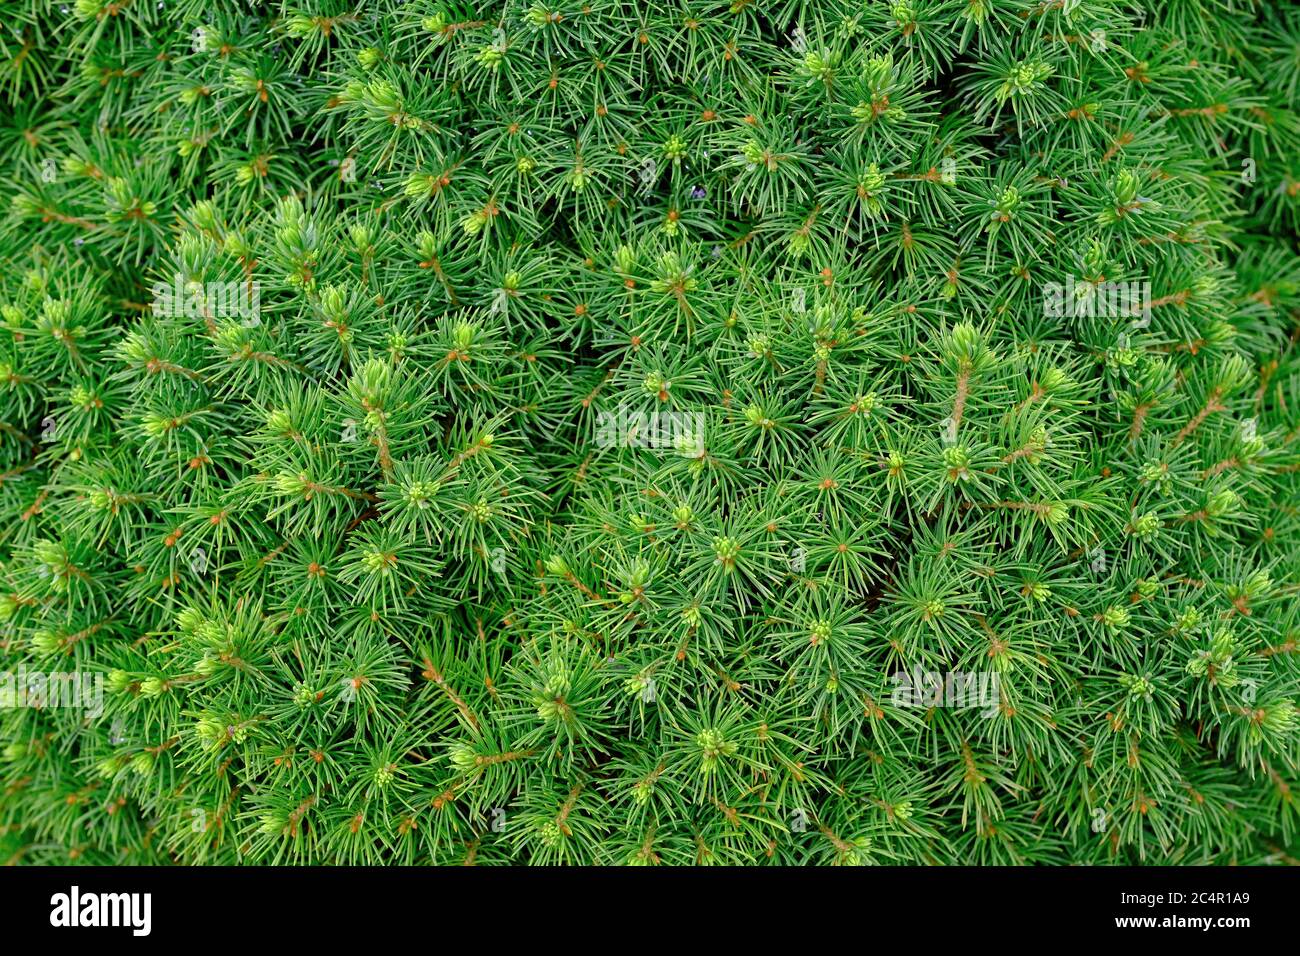 The Pinophyta, also known as Coniferophyta or Coniferae, needles on the large green bush. Vibrant green texure or plant background. Stock Photo